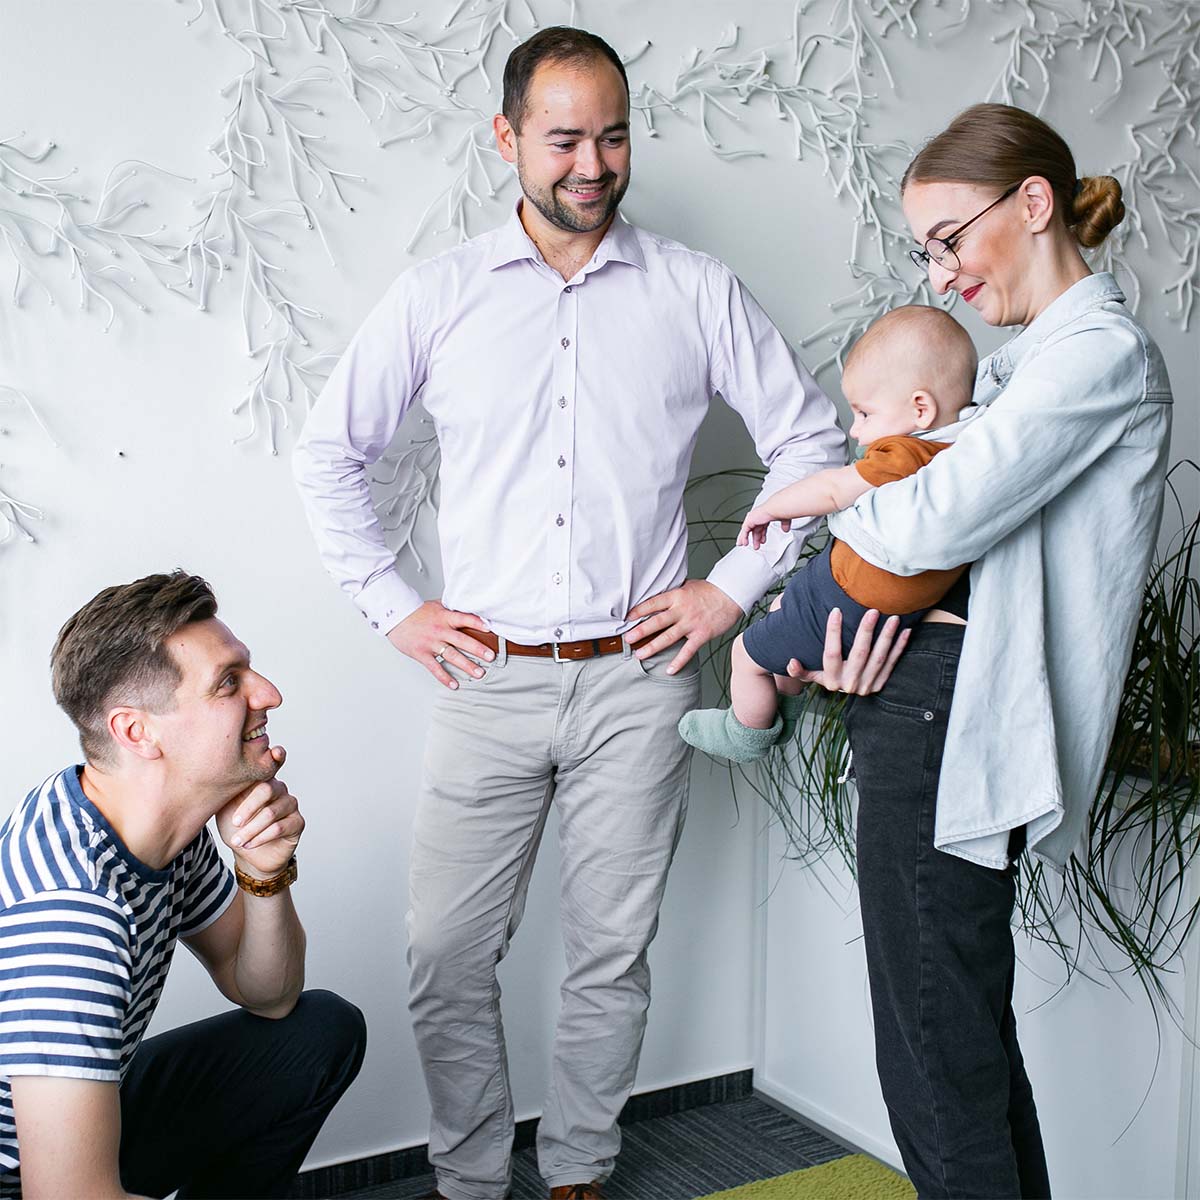 At Kentico, work-life balance is not just a buzzword.